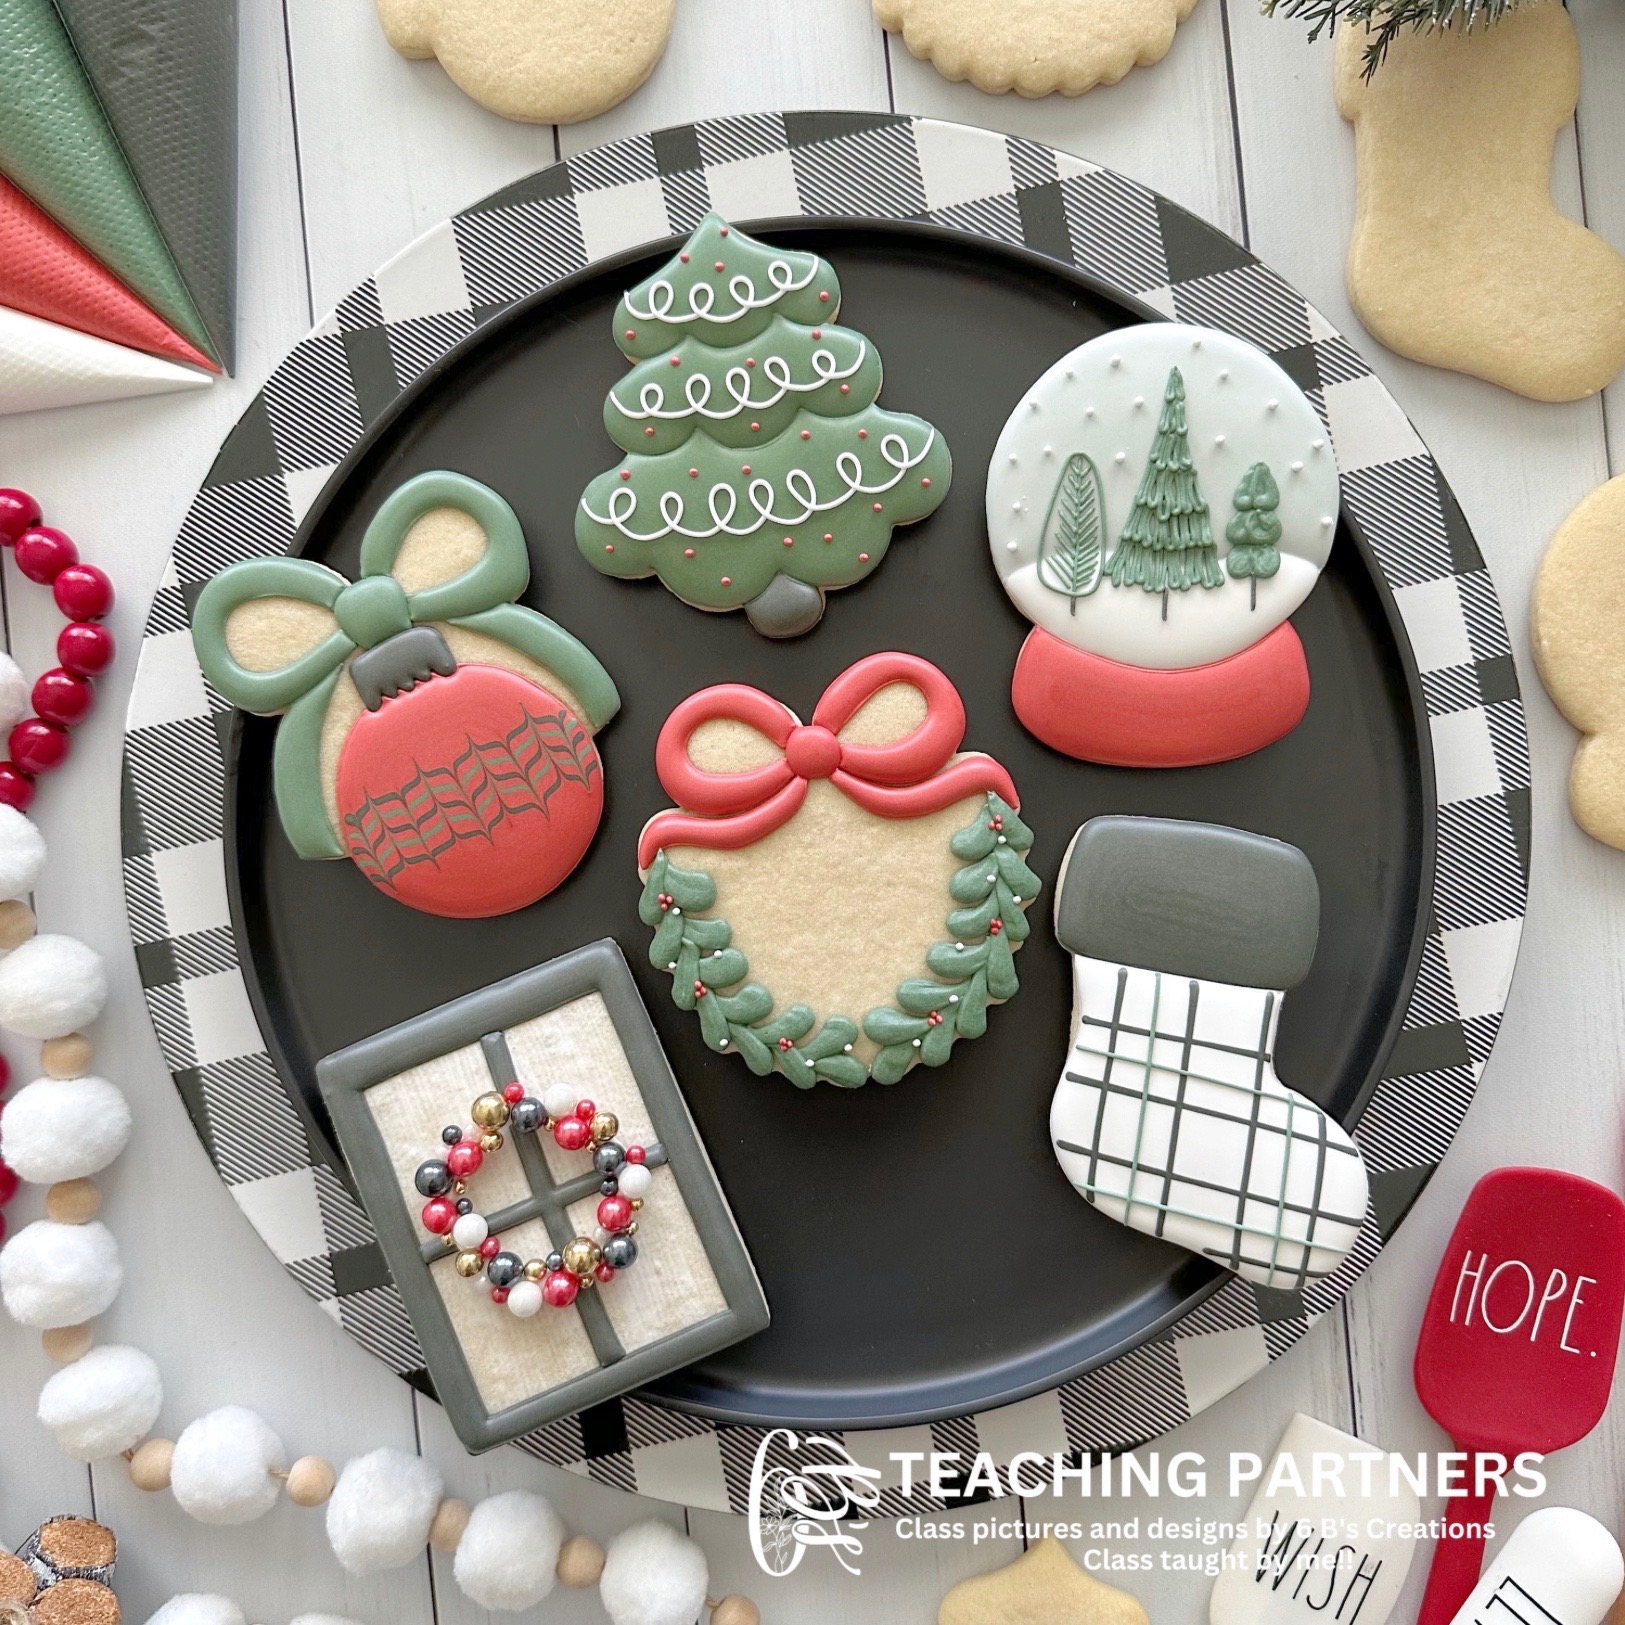 12/2 1:00pm Farmhouse Christmas Cookie Decorating Class 